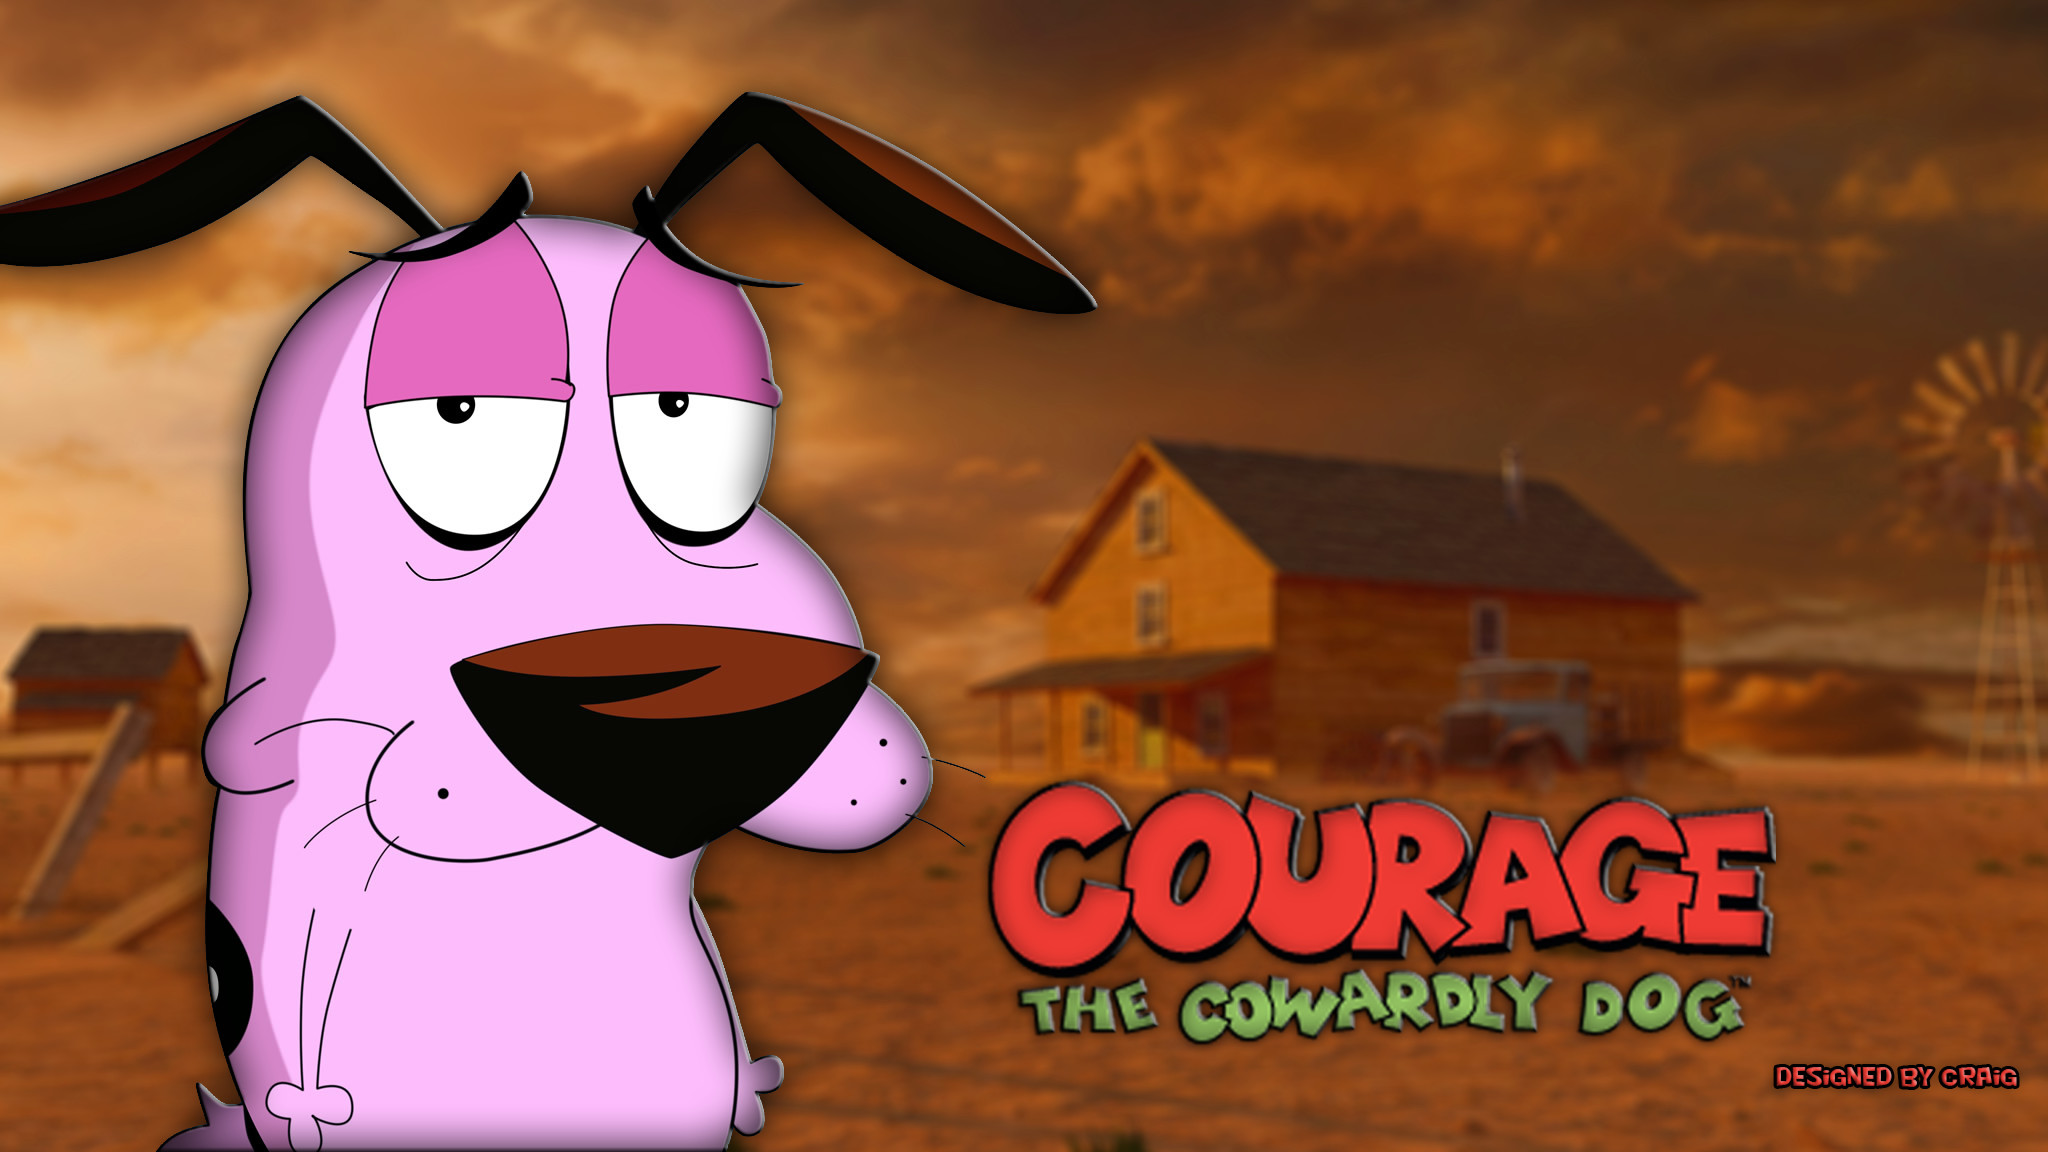 2048x1152 File: Courage The Cowardly Dog Wallpapers-HD Quality.jpg | Shizuko Bertsch